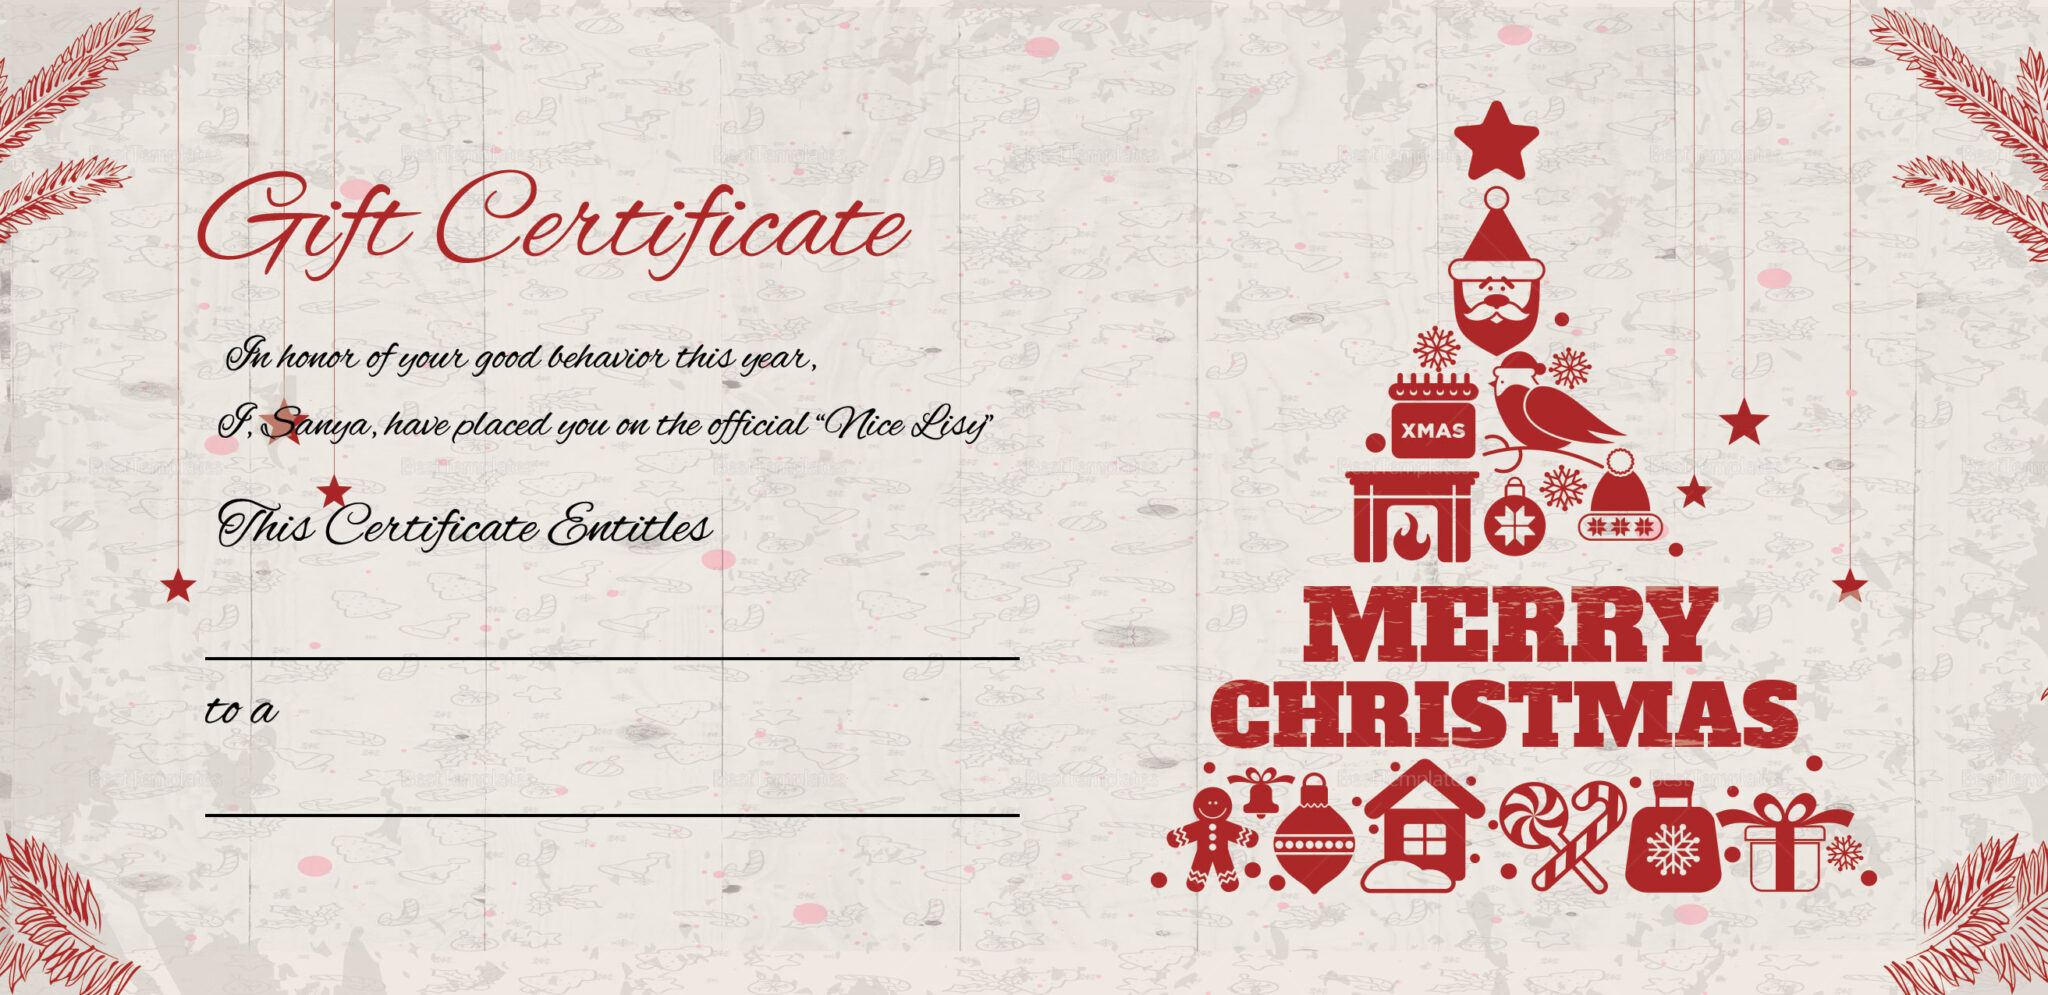 Design A Christmas Gift Voucher - Yeppe in Christmas Gift Certificate